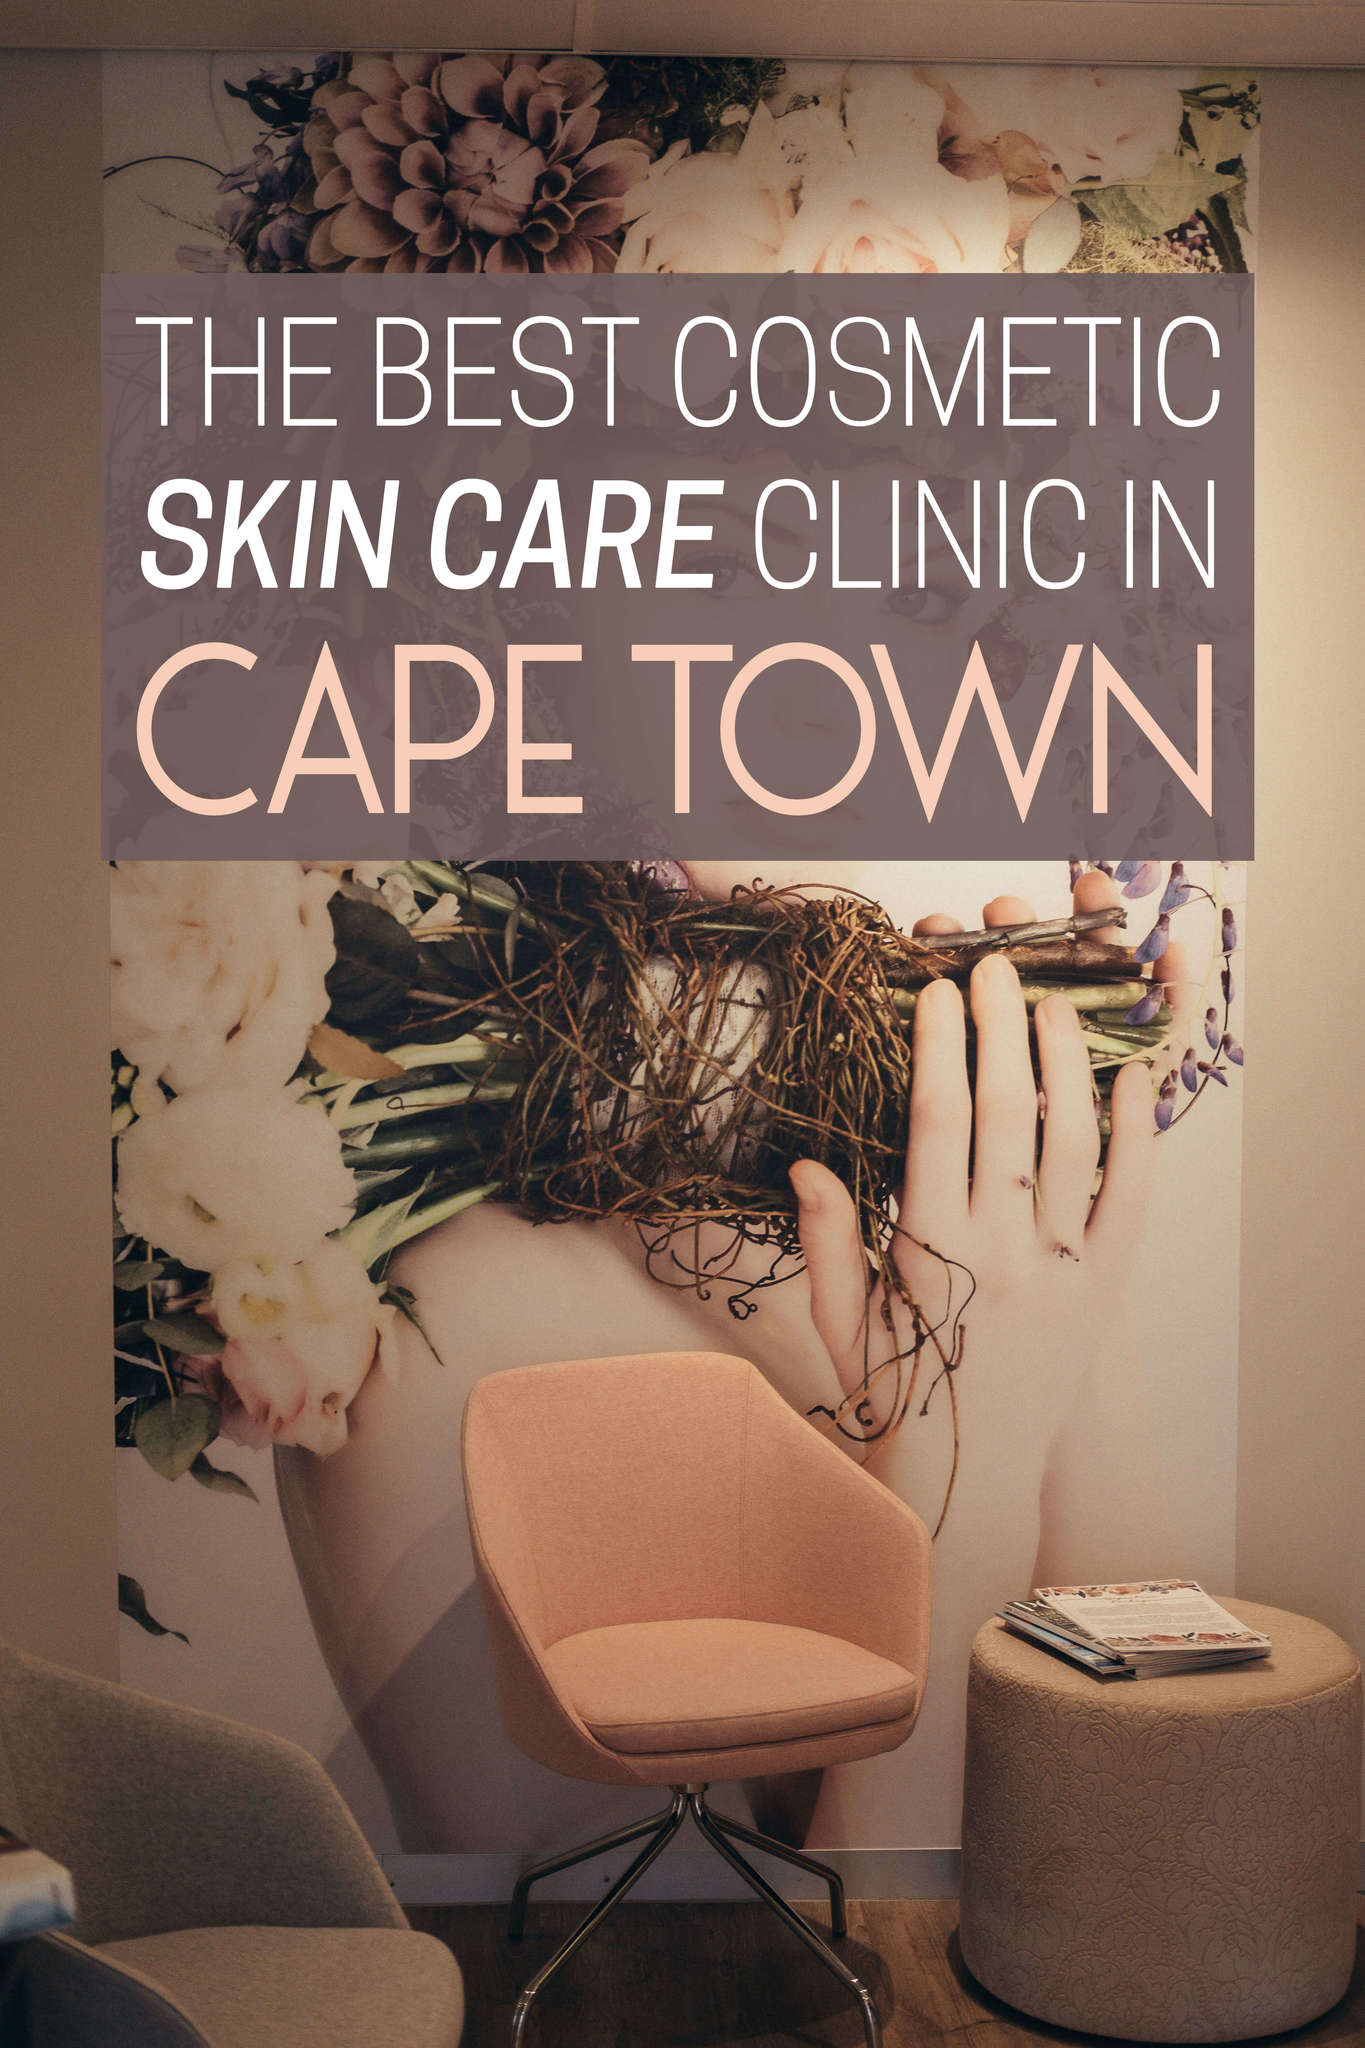 The Best Cosmetic Skin Care Clinic in Cape Town